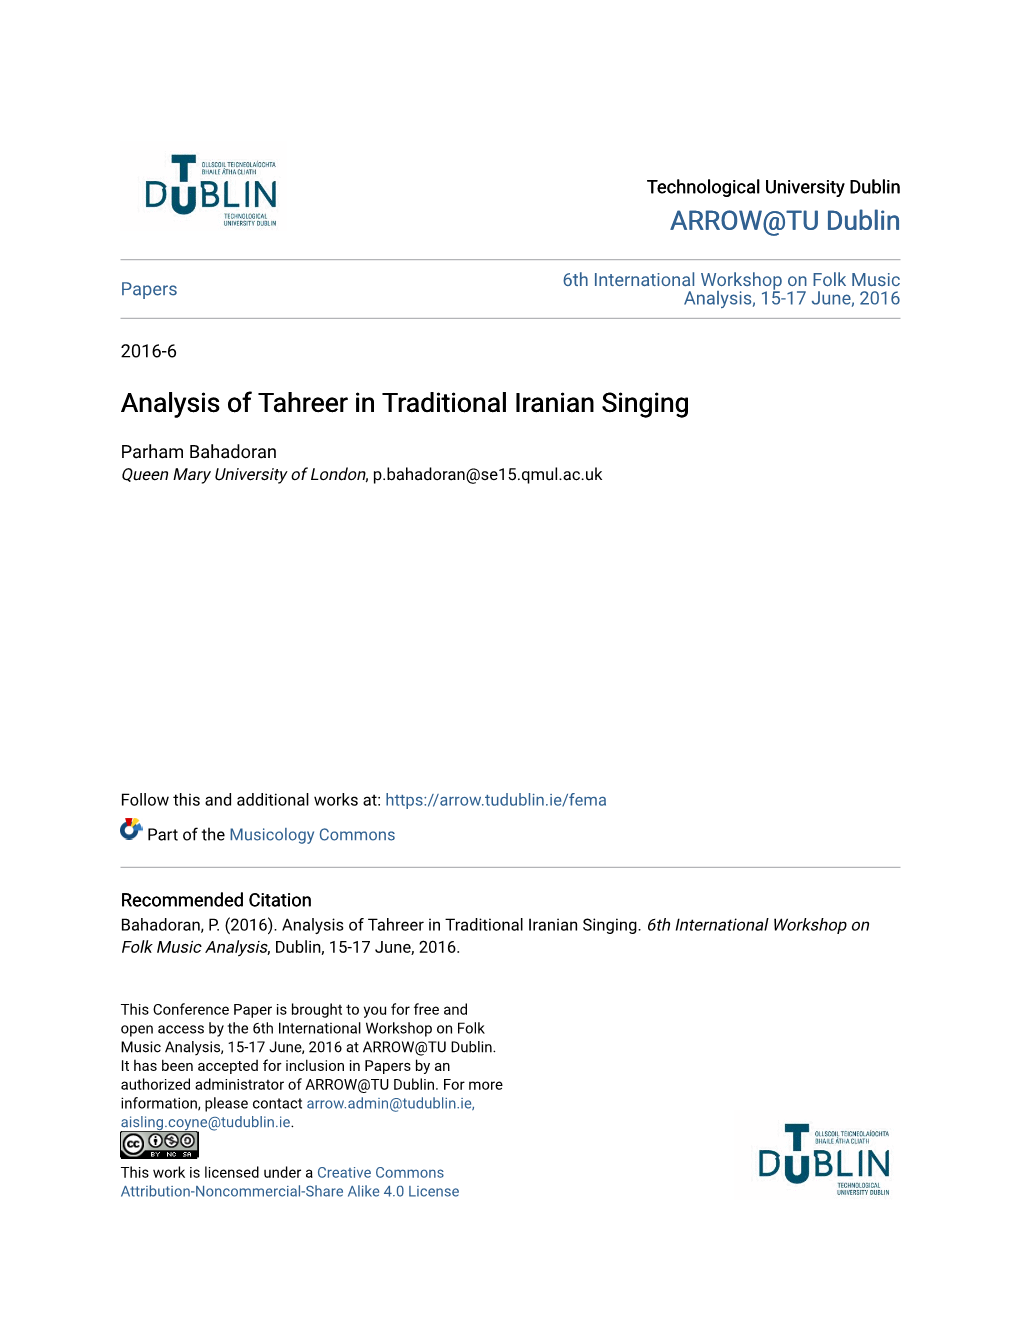 Analysis of Tahreer in Traditional Iranian Singing